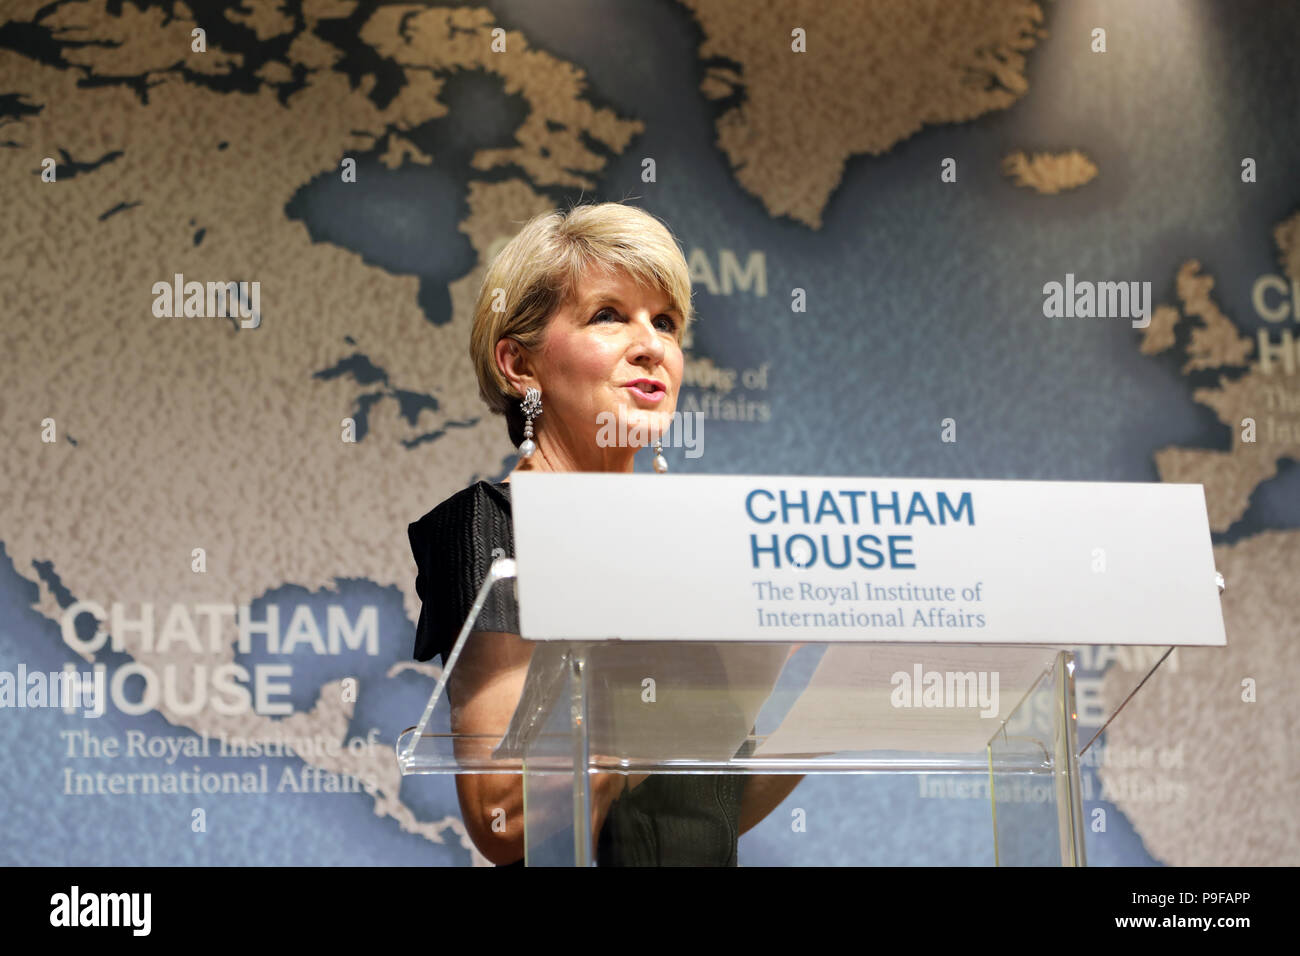 London / UK - July 18 2018: Julie Bishop, Australian minister for foreign affairs, speaking at the Chatham House think-tank in central London. Credit: Dominic Dudley/Alamy Live News Stock Photo